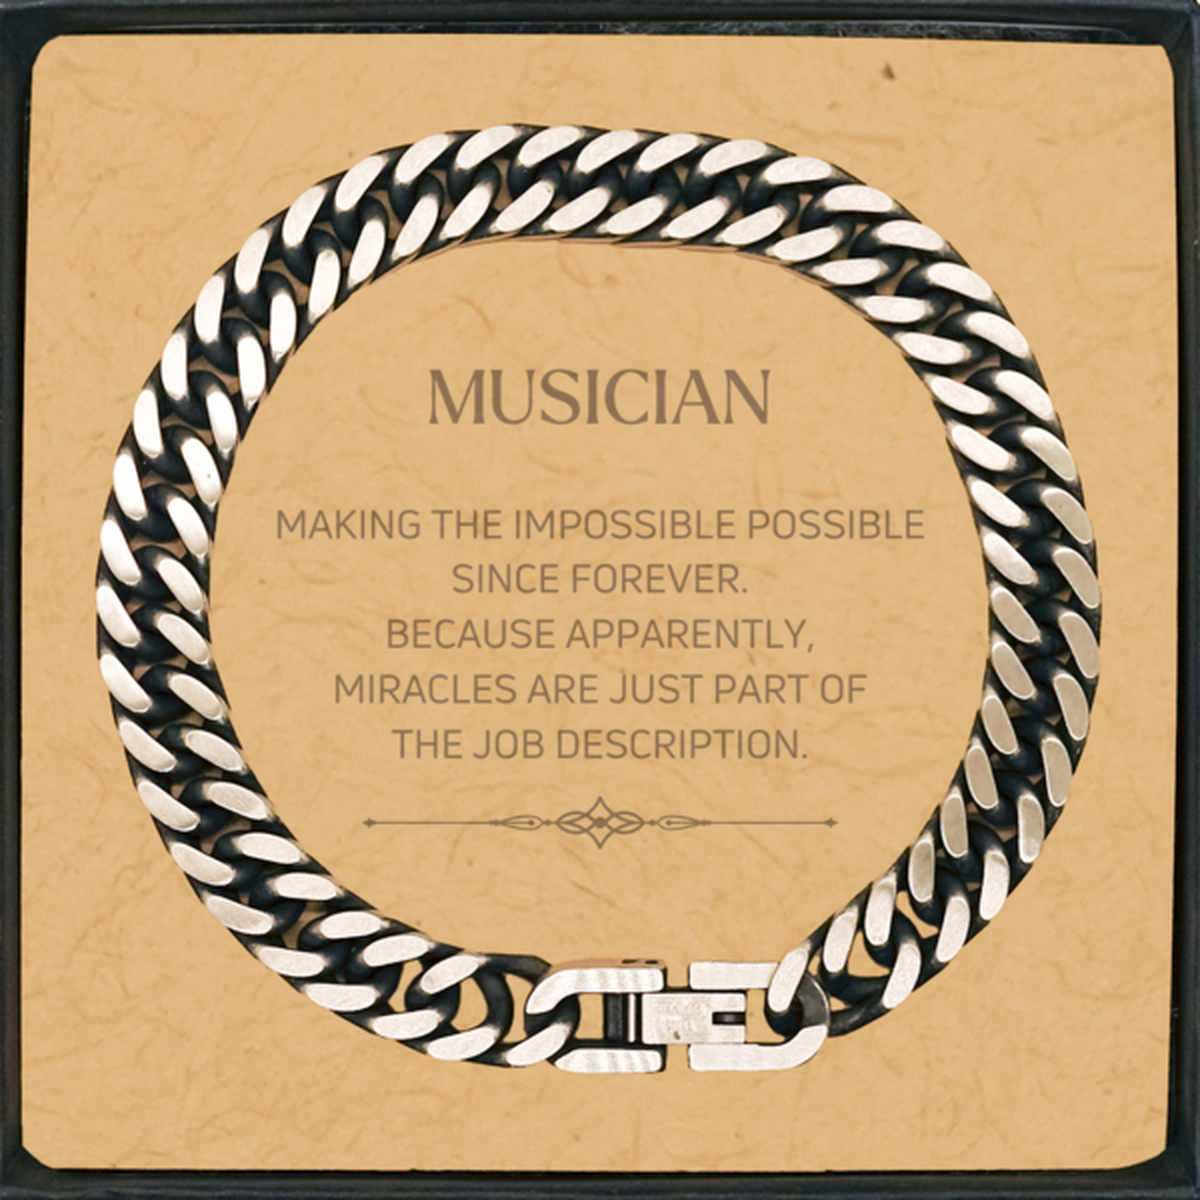 Funny Musician Gifts, Miracles are just part of the job description, Inspirational Birthday Cuban Link Chain Bracelet For Musician, Men, Women, Coworkers, Friends, Boss